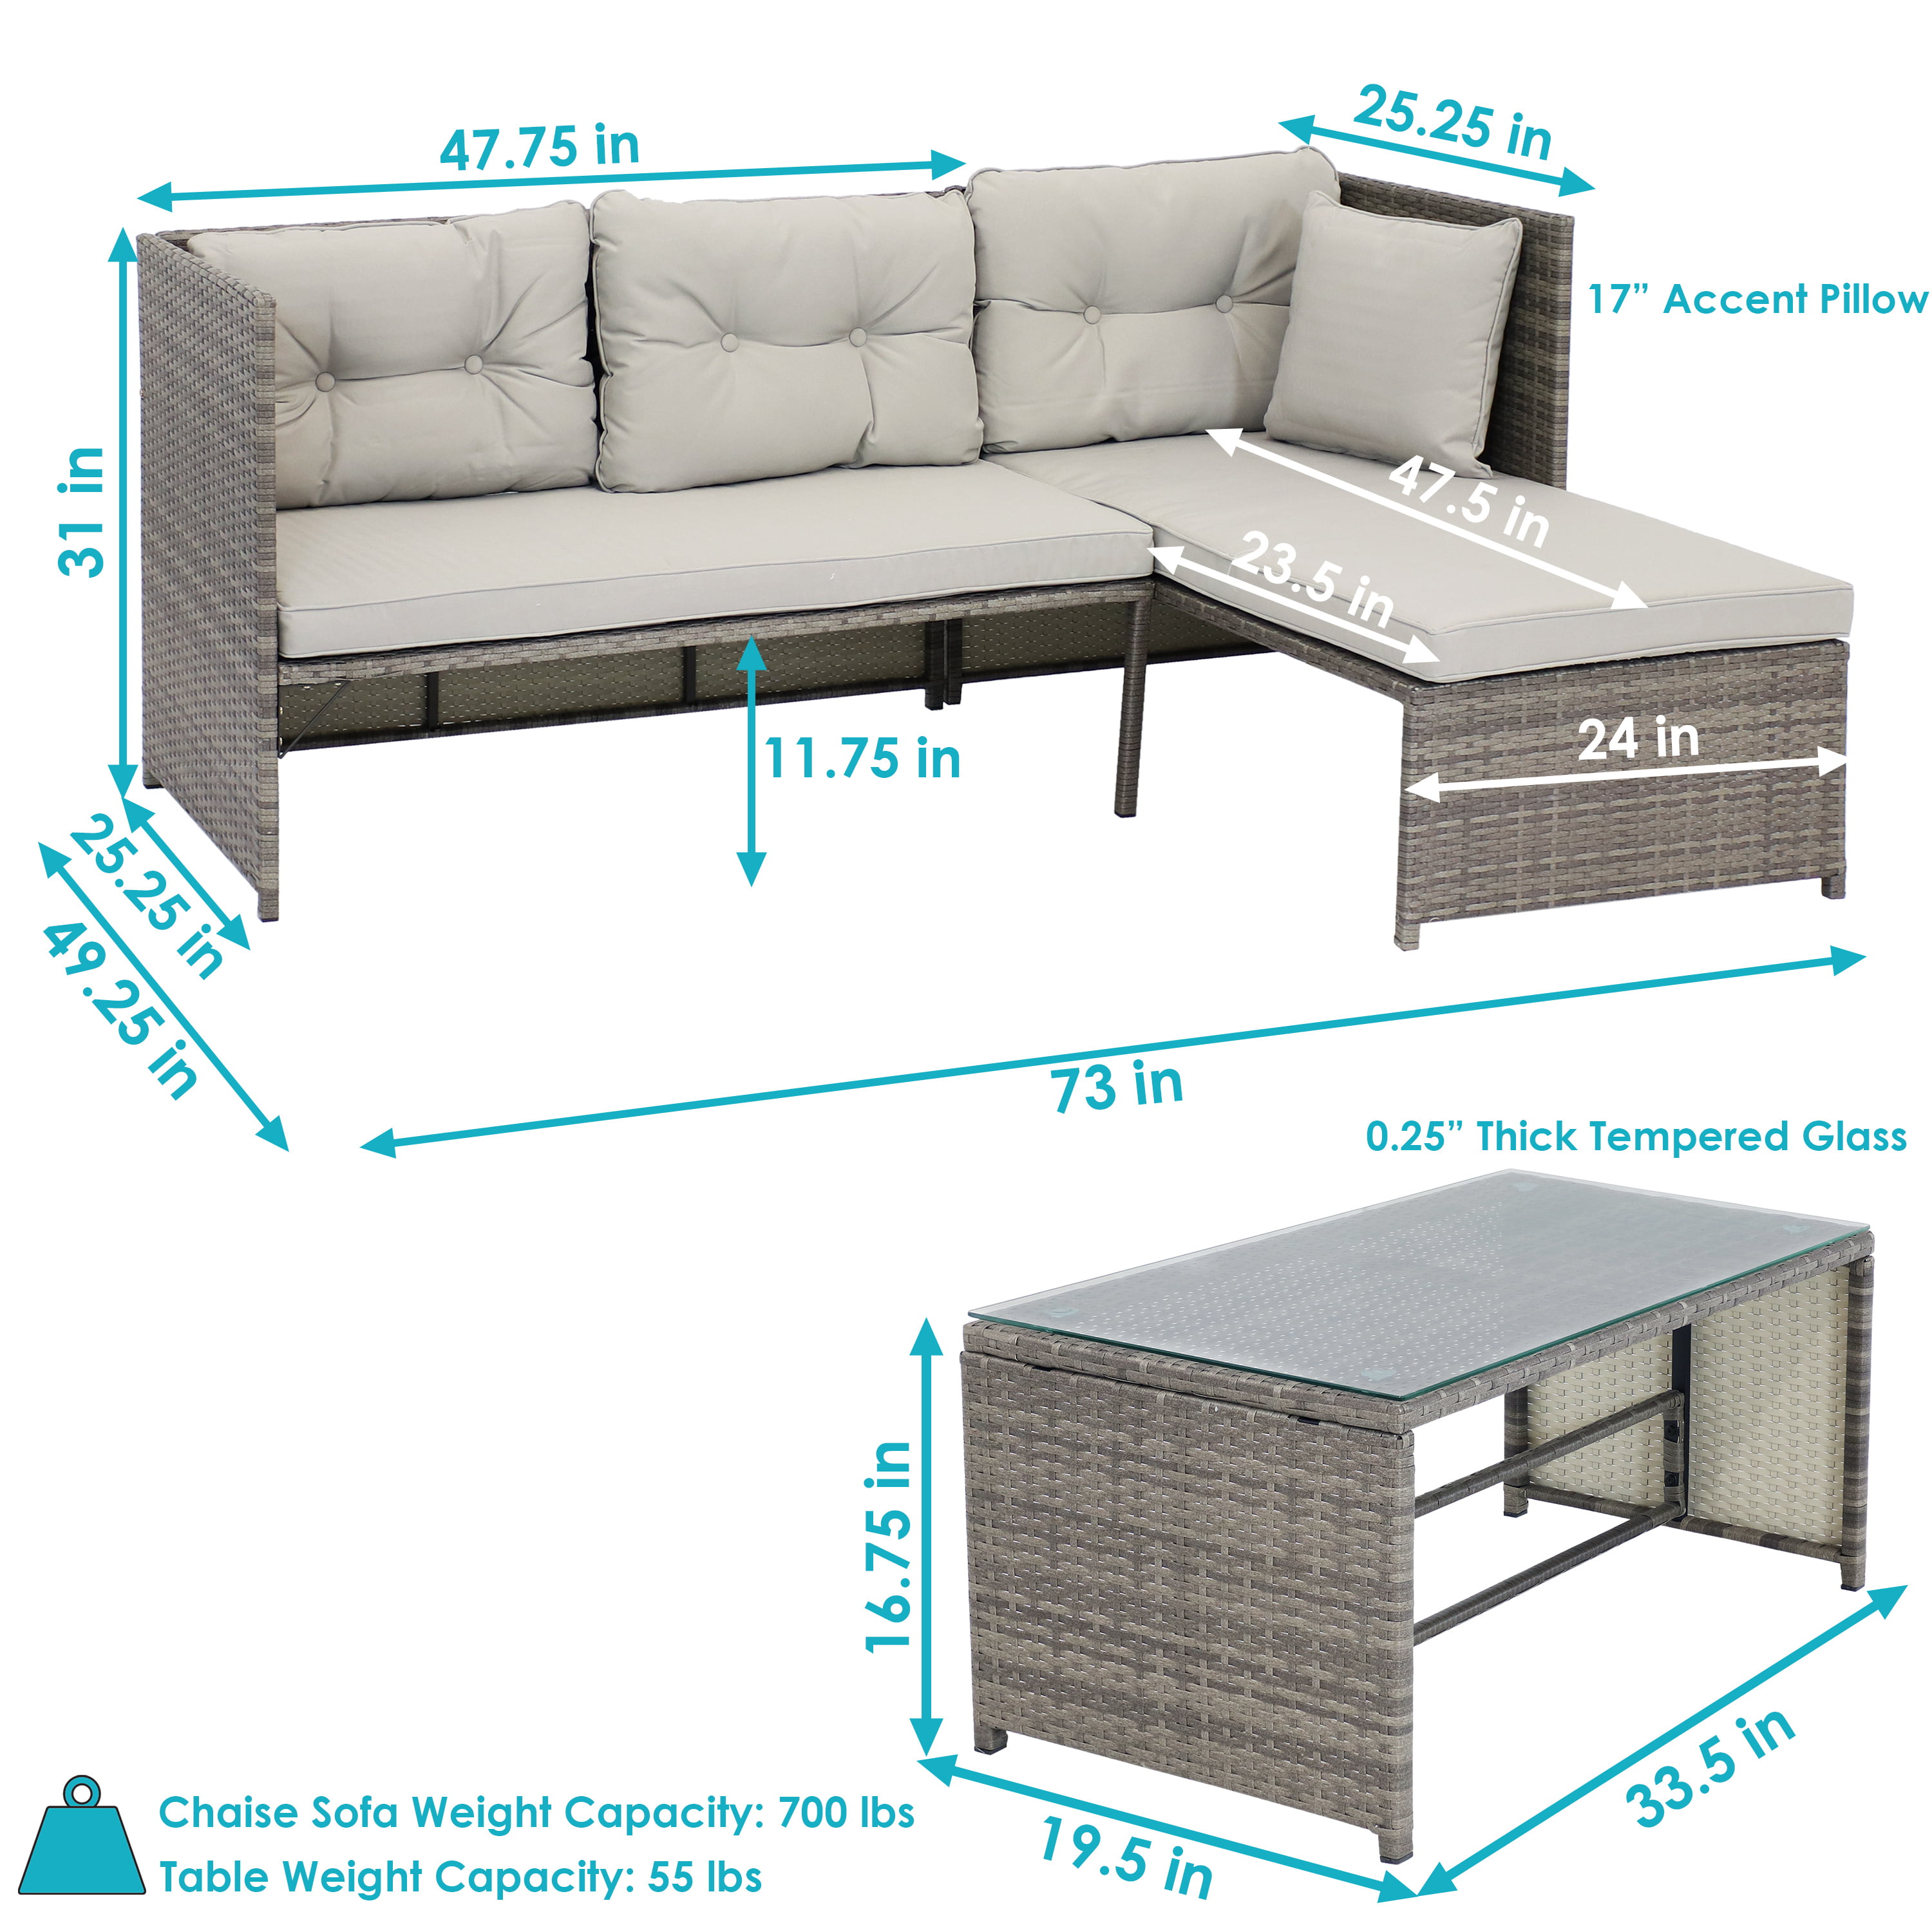 Sunnydaze Longford Outdoor Patio Sectional Sofa Set with Cushions - Stone Gray - image 3 of 12